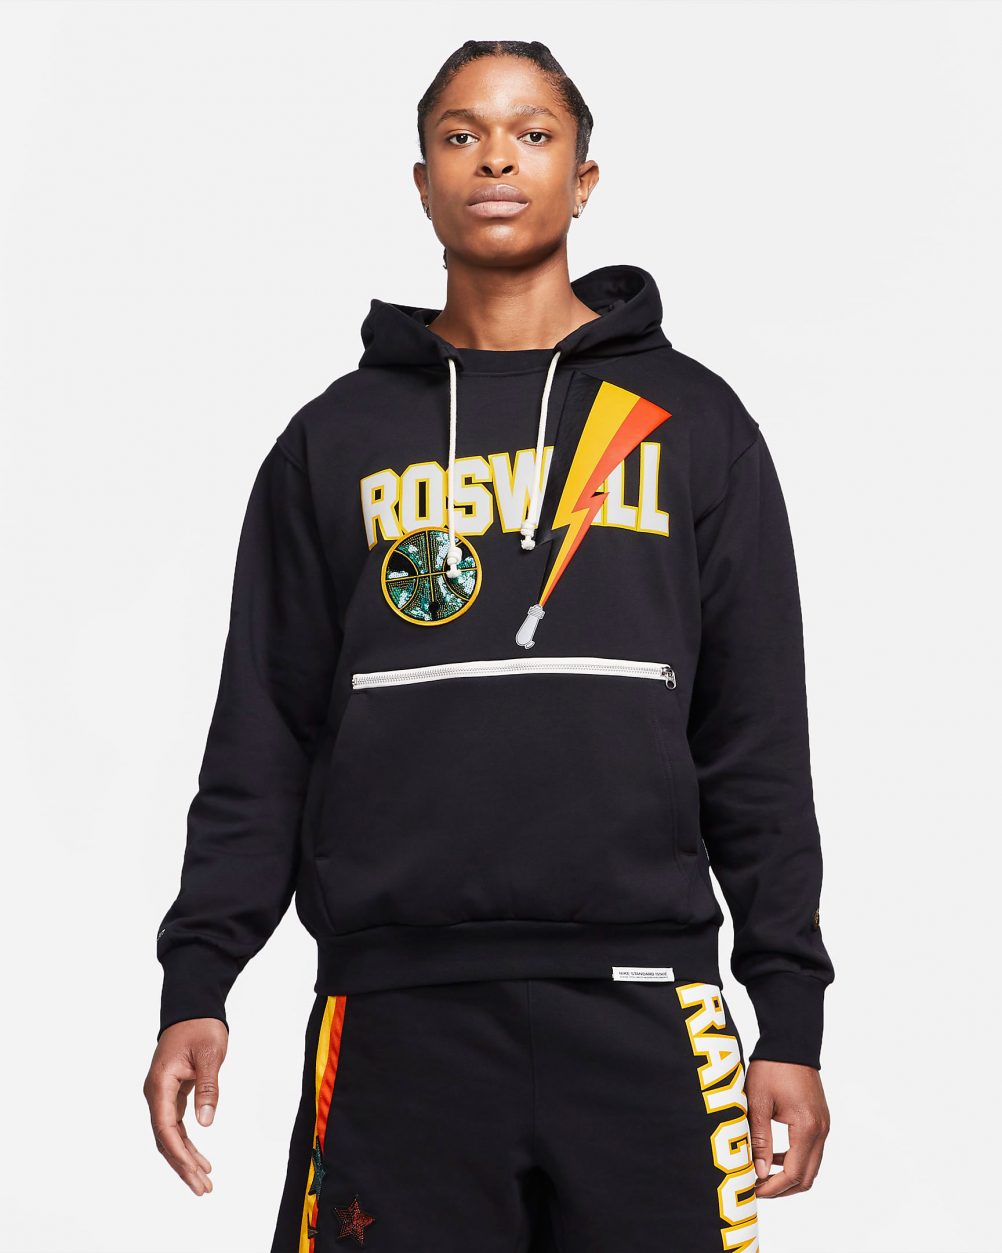 Nike Roswell Rayguns Shirts Hoodie Shorts Jerseys and Shoes